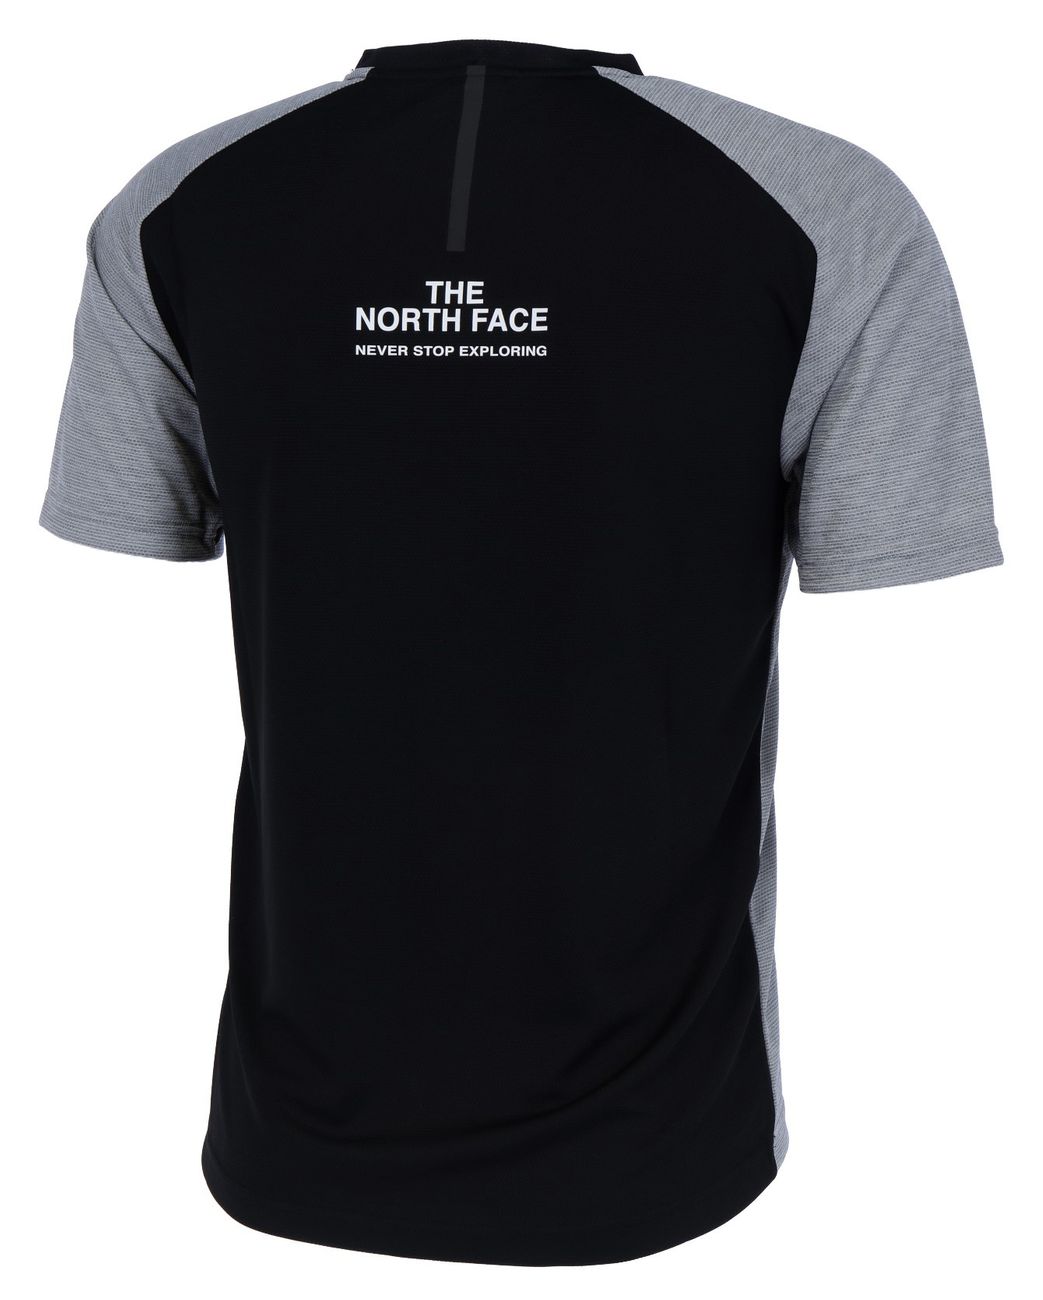 THE NORTH FACE M MOUNTAIN ATHLETICS TEE Herren T-Shirt - The North Face - SAGATOO - 193394987719